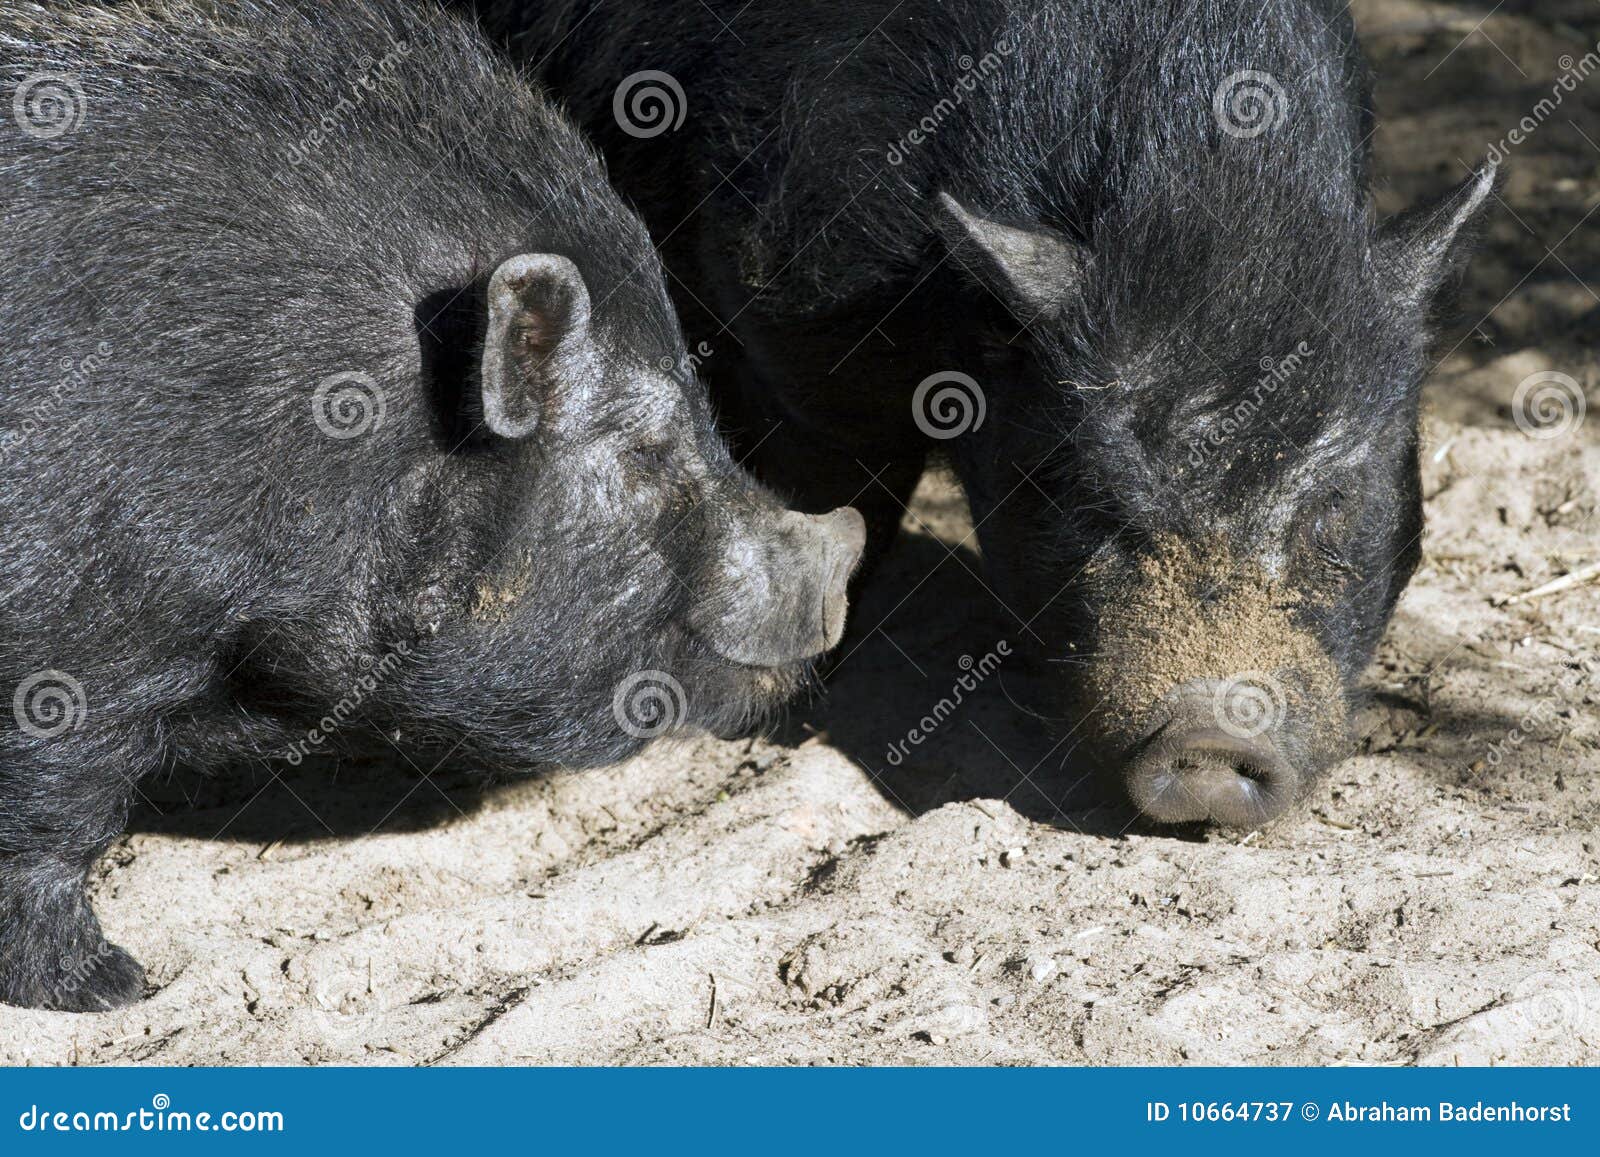 potbellied pigs